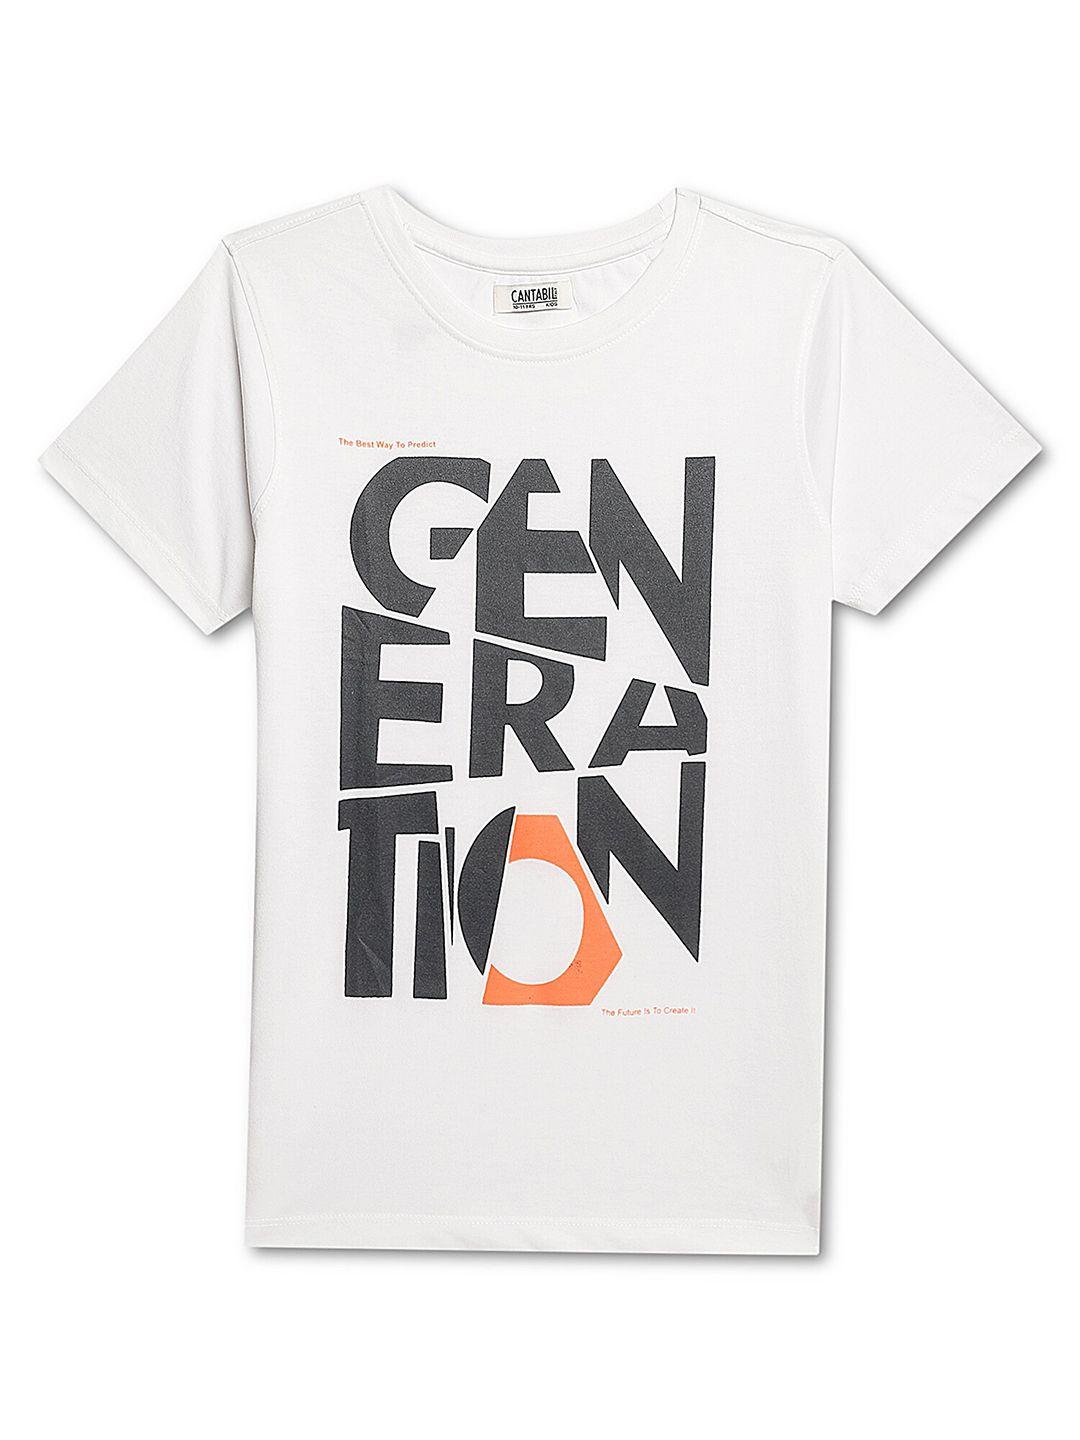 cantabil boys typography printed cotton t-shirt